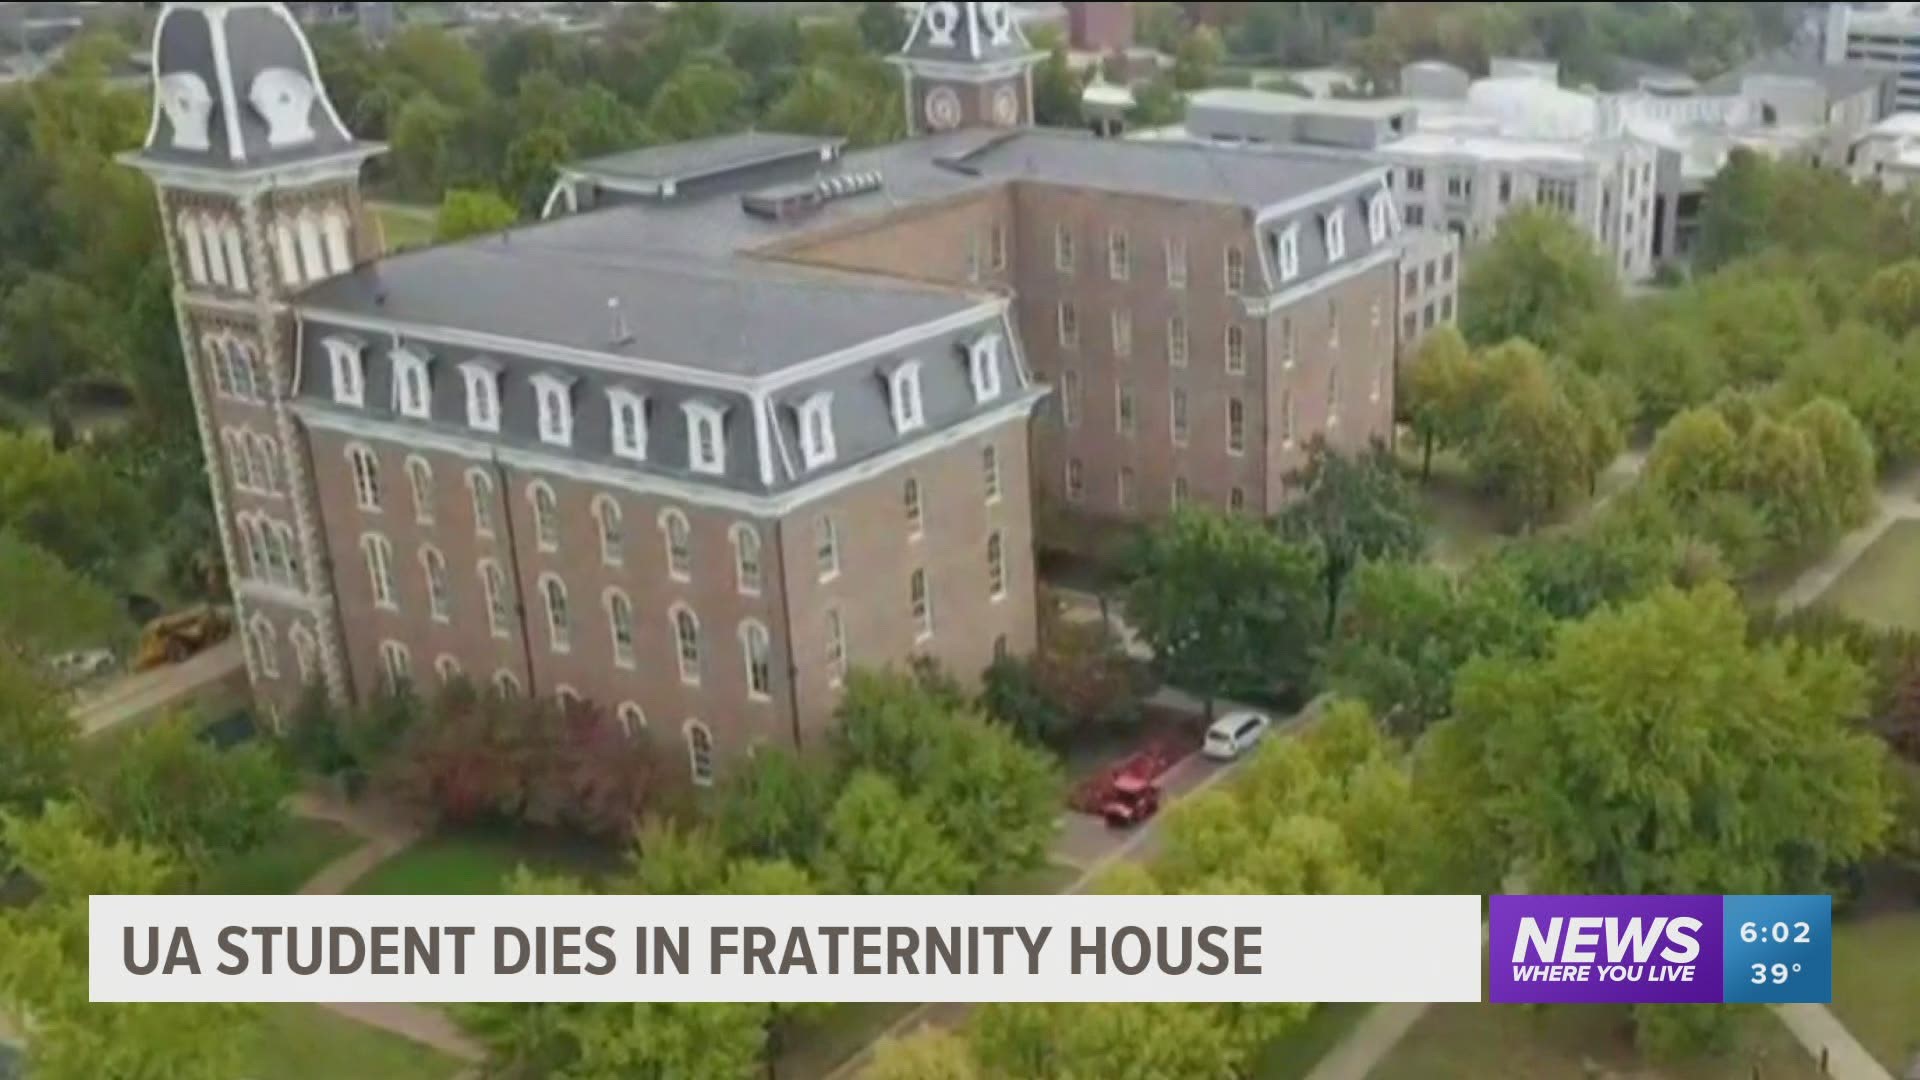 A student died in a fraternity house bathroom on the University of Arkansas campus.